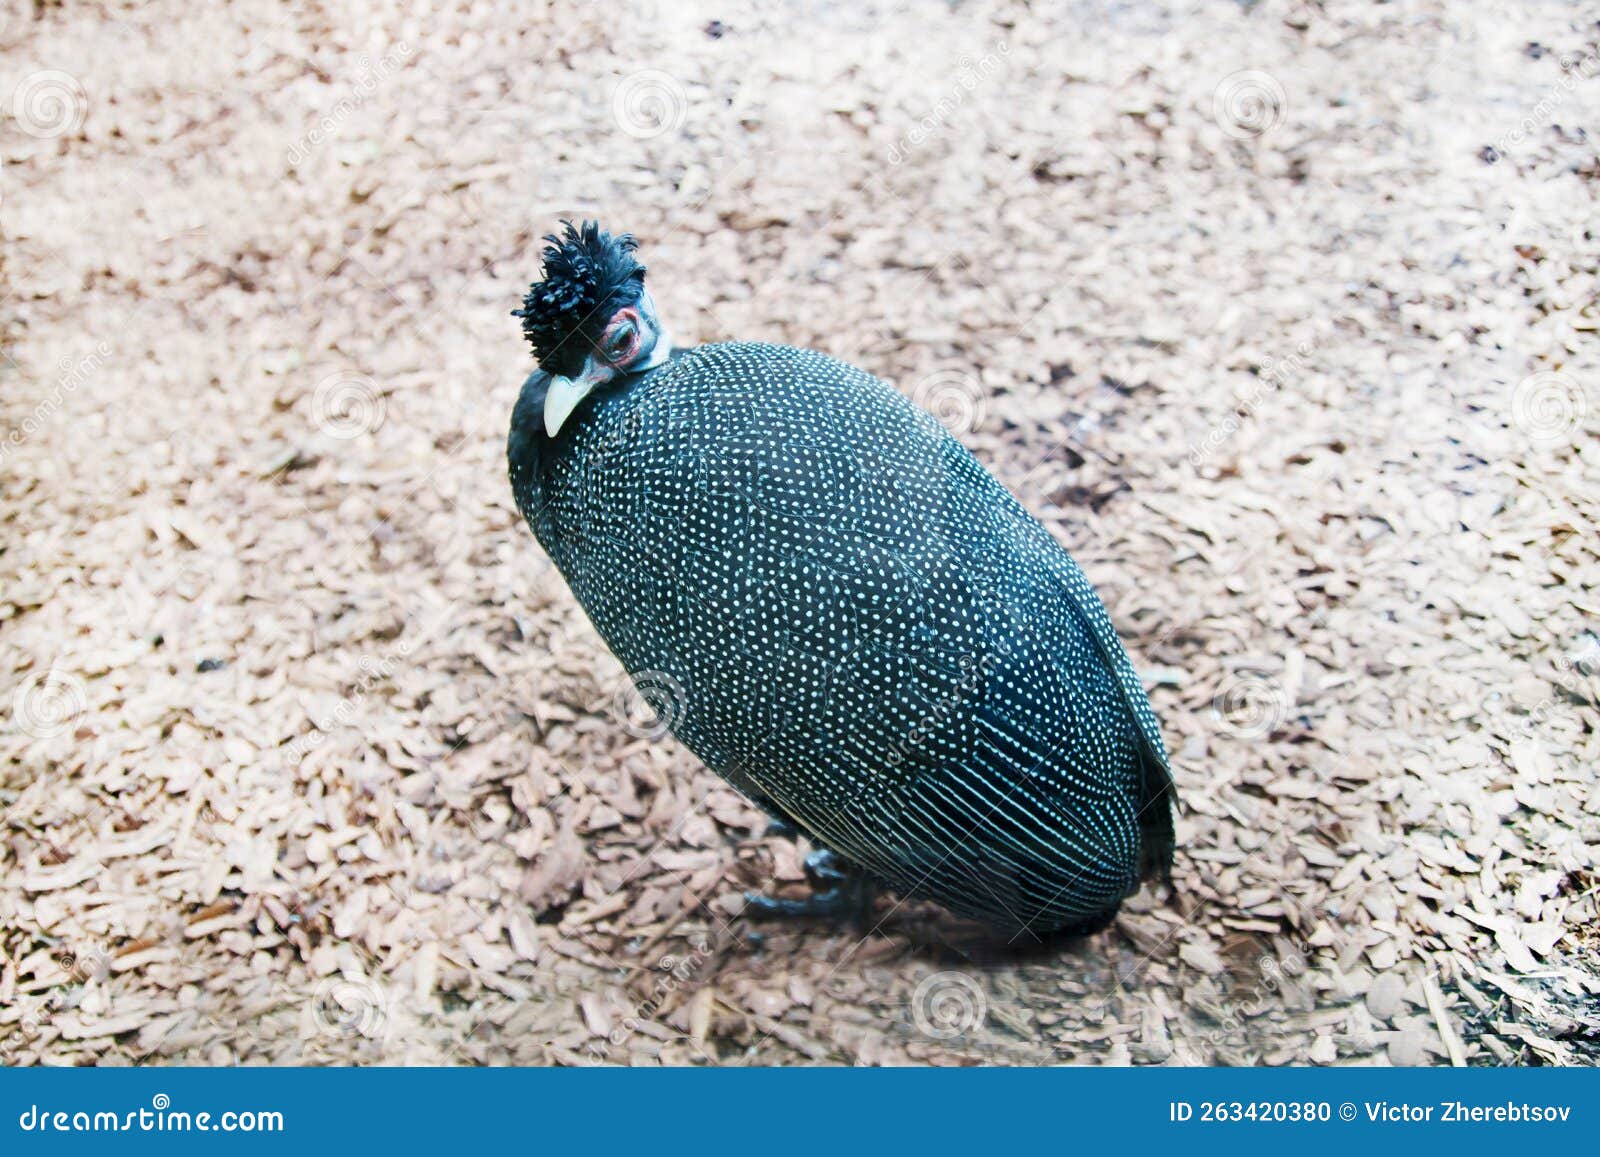 Guinea fowl: The peculiar bird with a plethora of uses